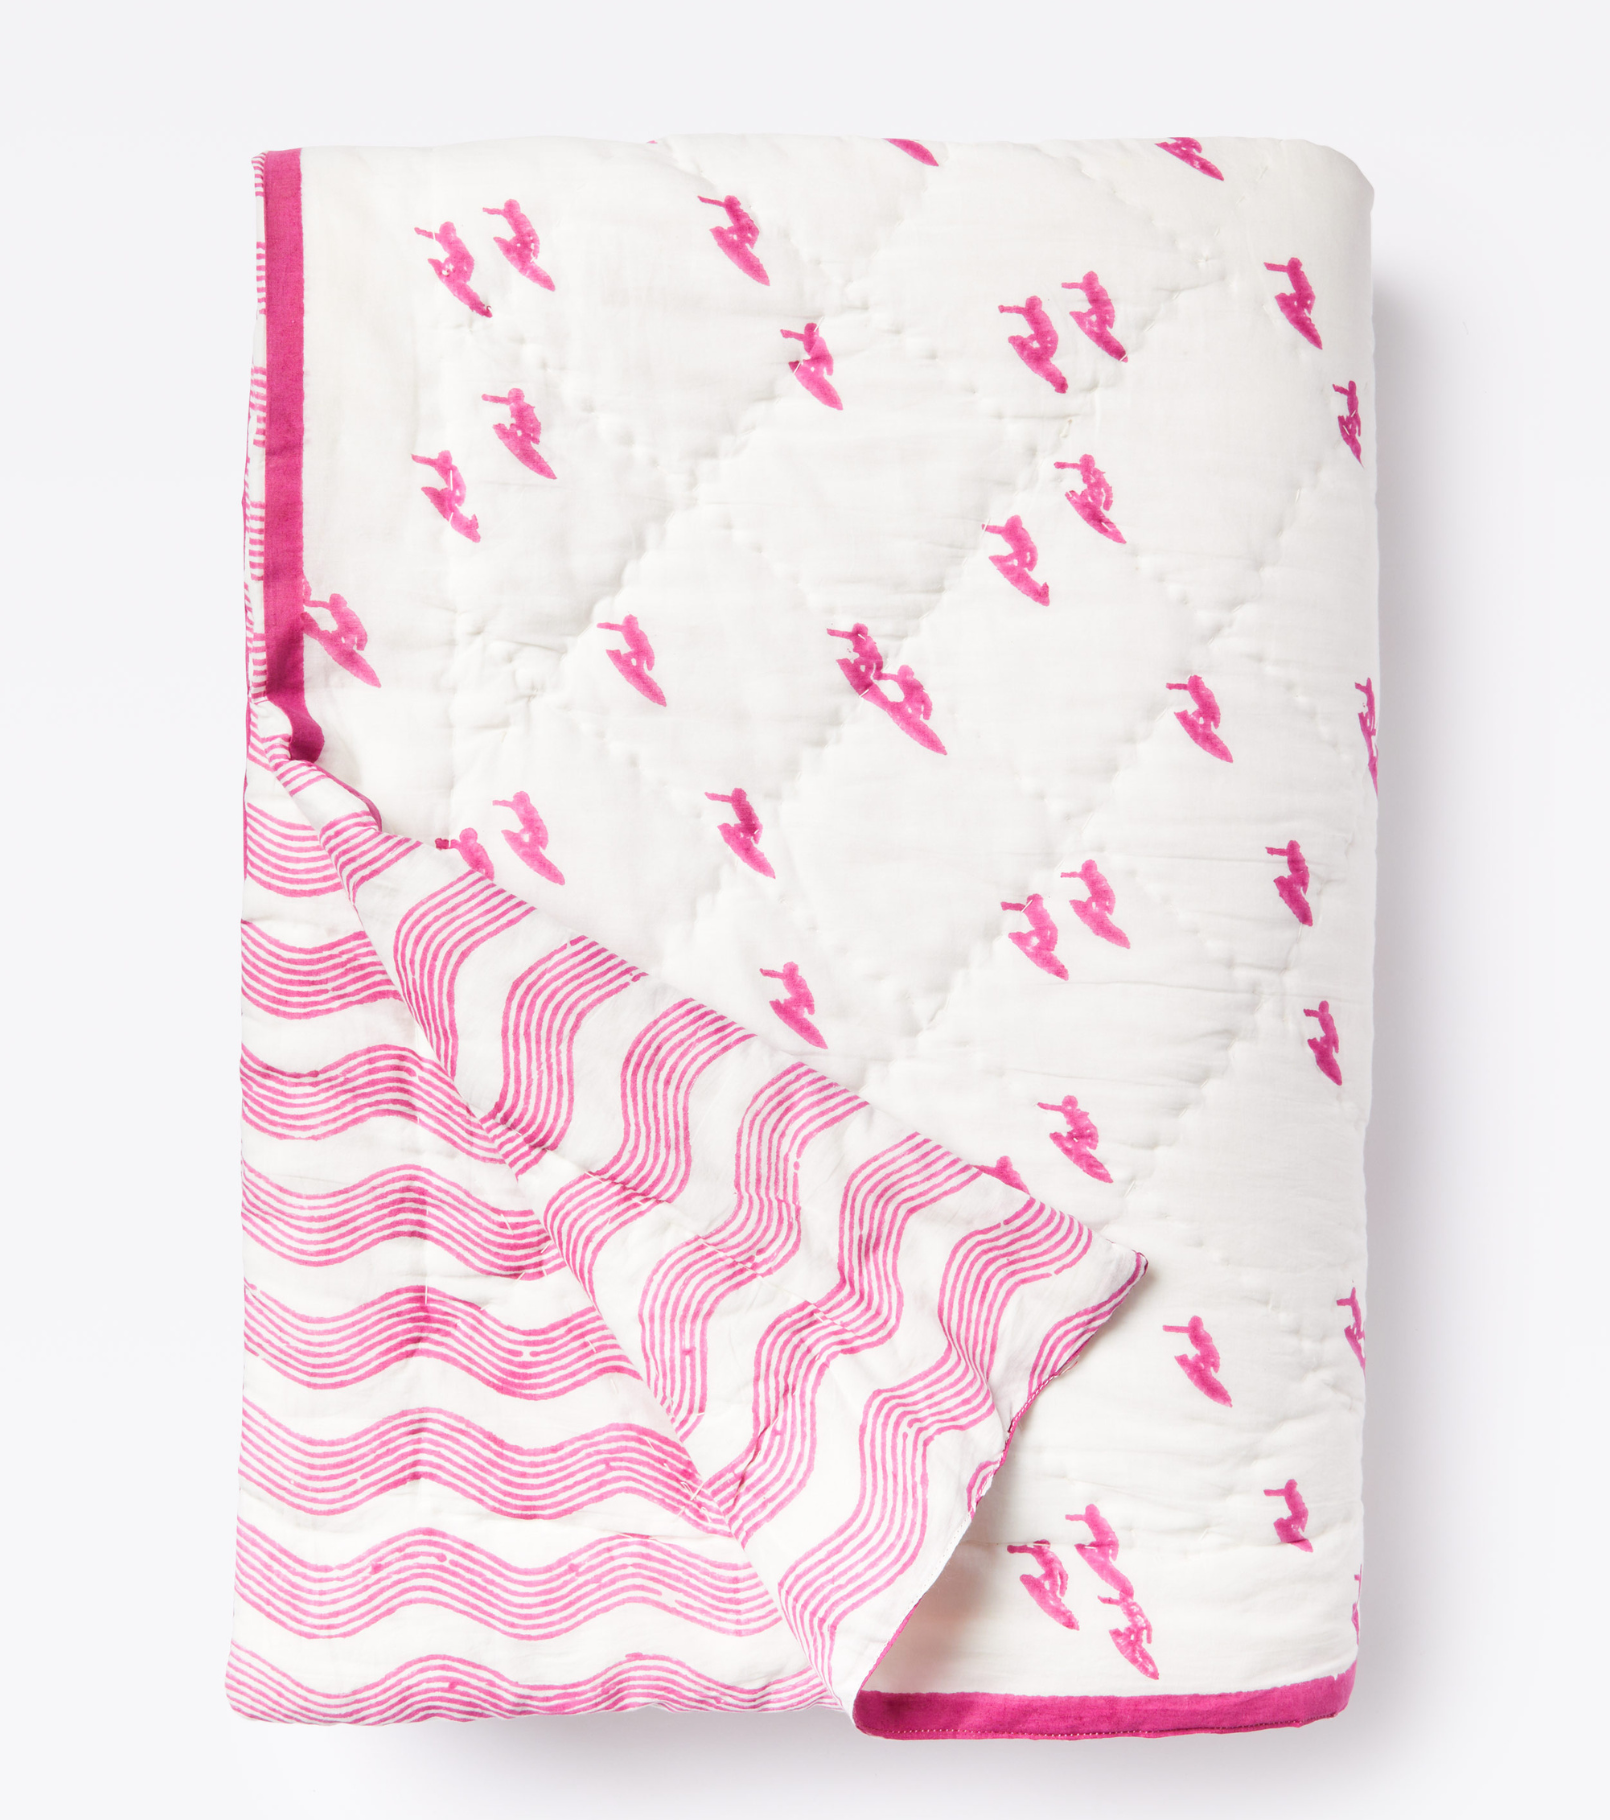 Andrew Mau x Averylily Surfer Blockprint Quilt in Orchid Pink.